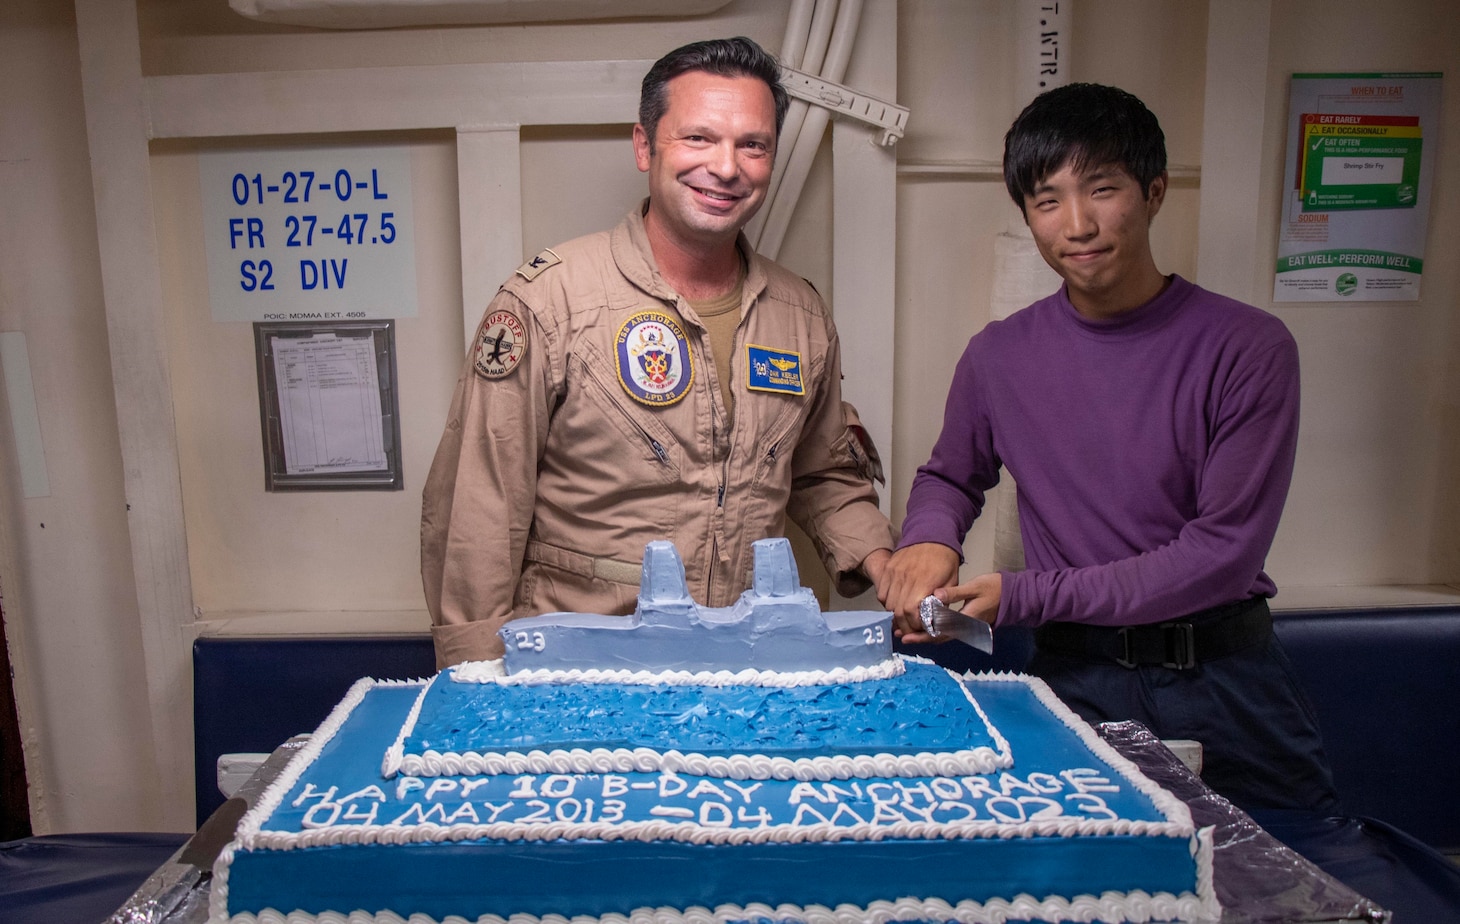 Capt. Daniel Keeler, commanding officer of amphibious transport dock USS Anchorage (LPD 23), left, and Aviation Boatswain’s Mate (Fuel) Airman Joel Kim, from Anchorage, Alaska, participate in a cake-cutting ceremony for the 10th anniversary of Anchorage’s commissioning, May 7, 2023.